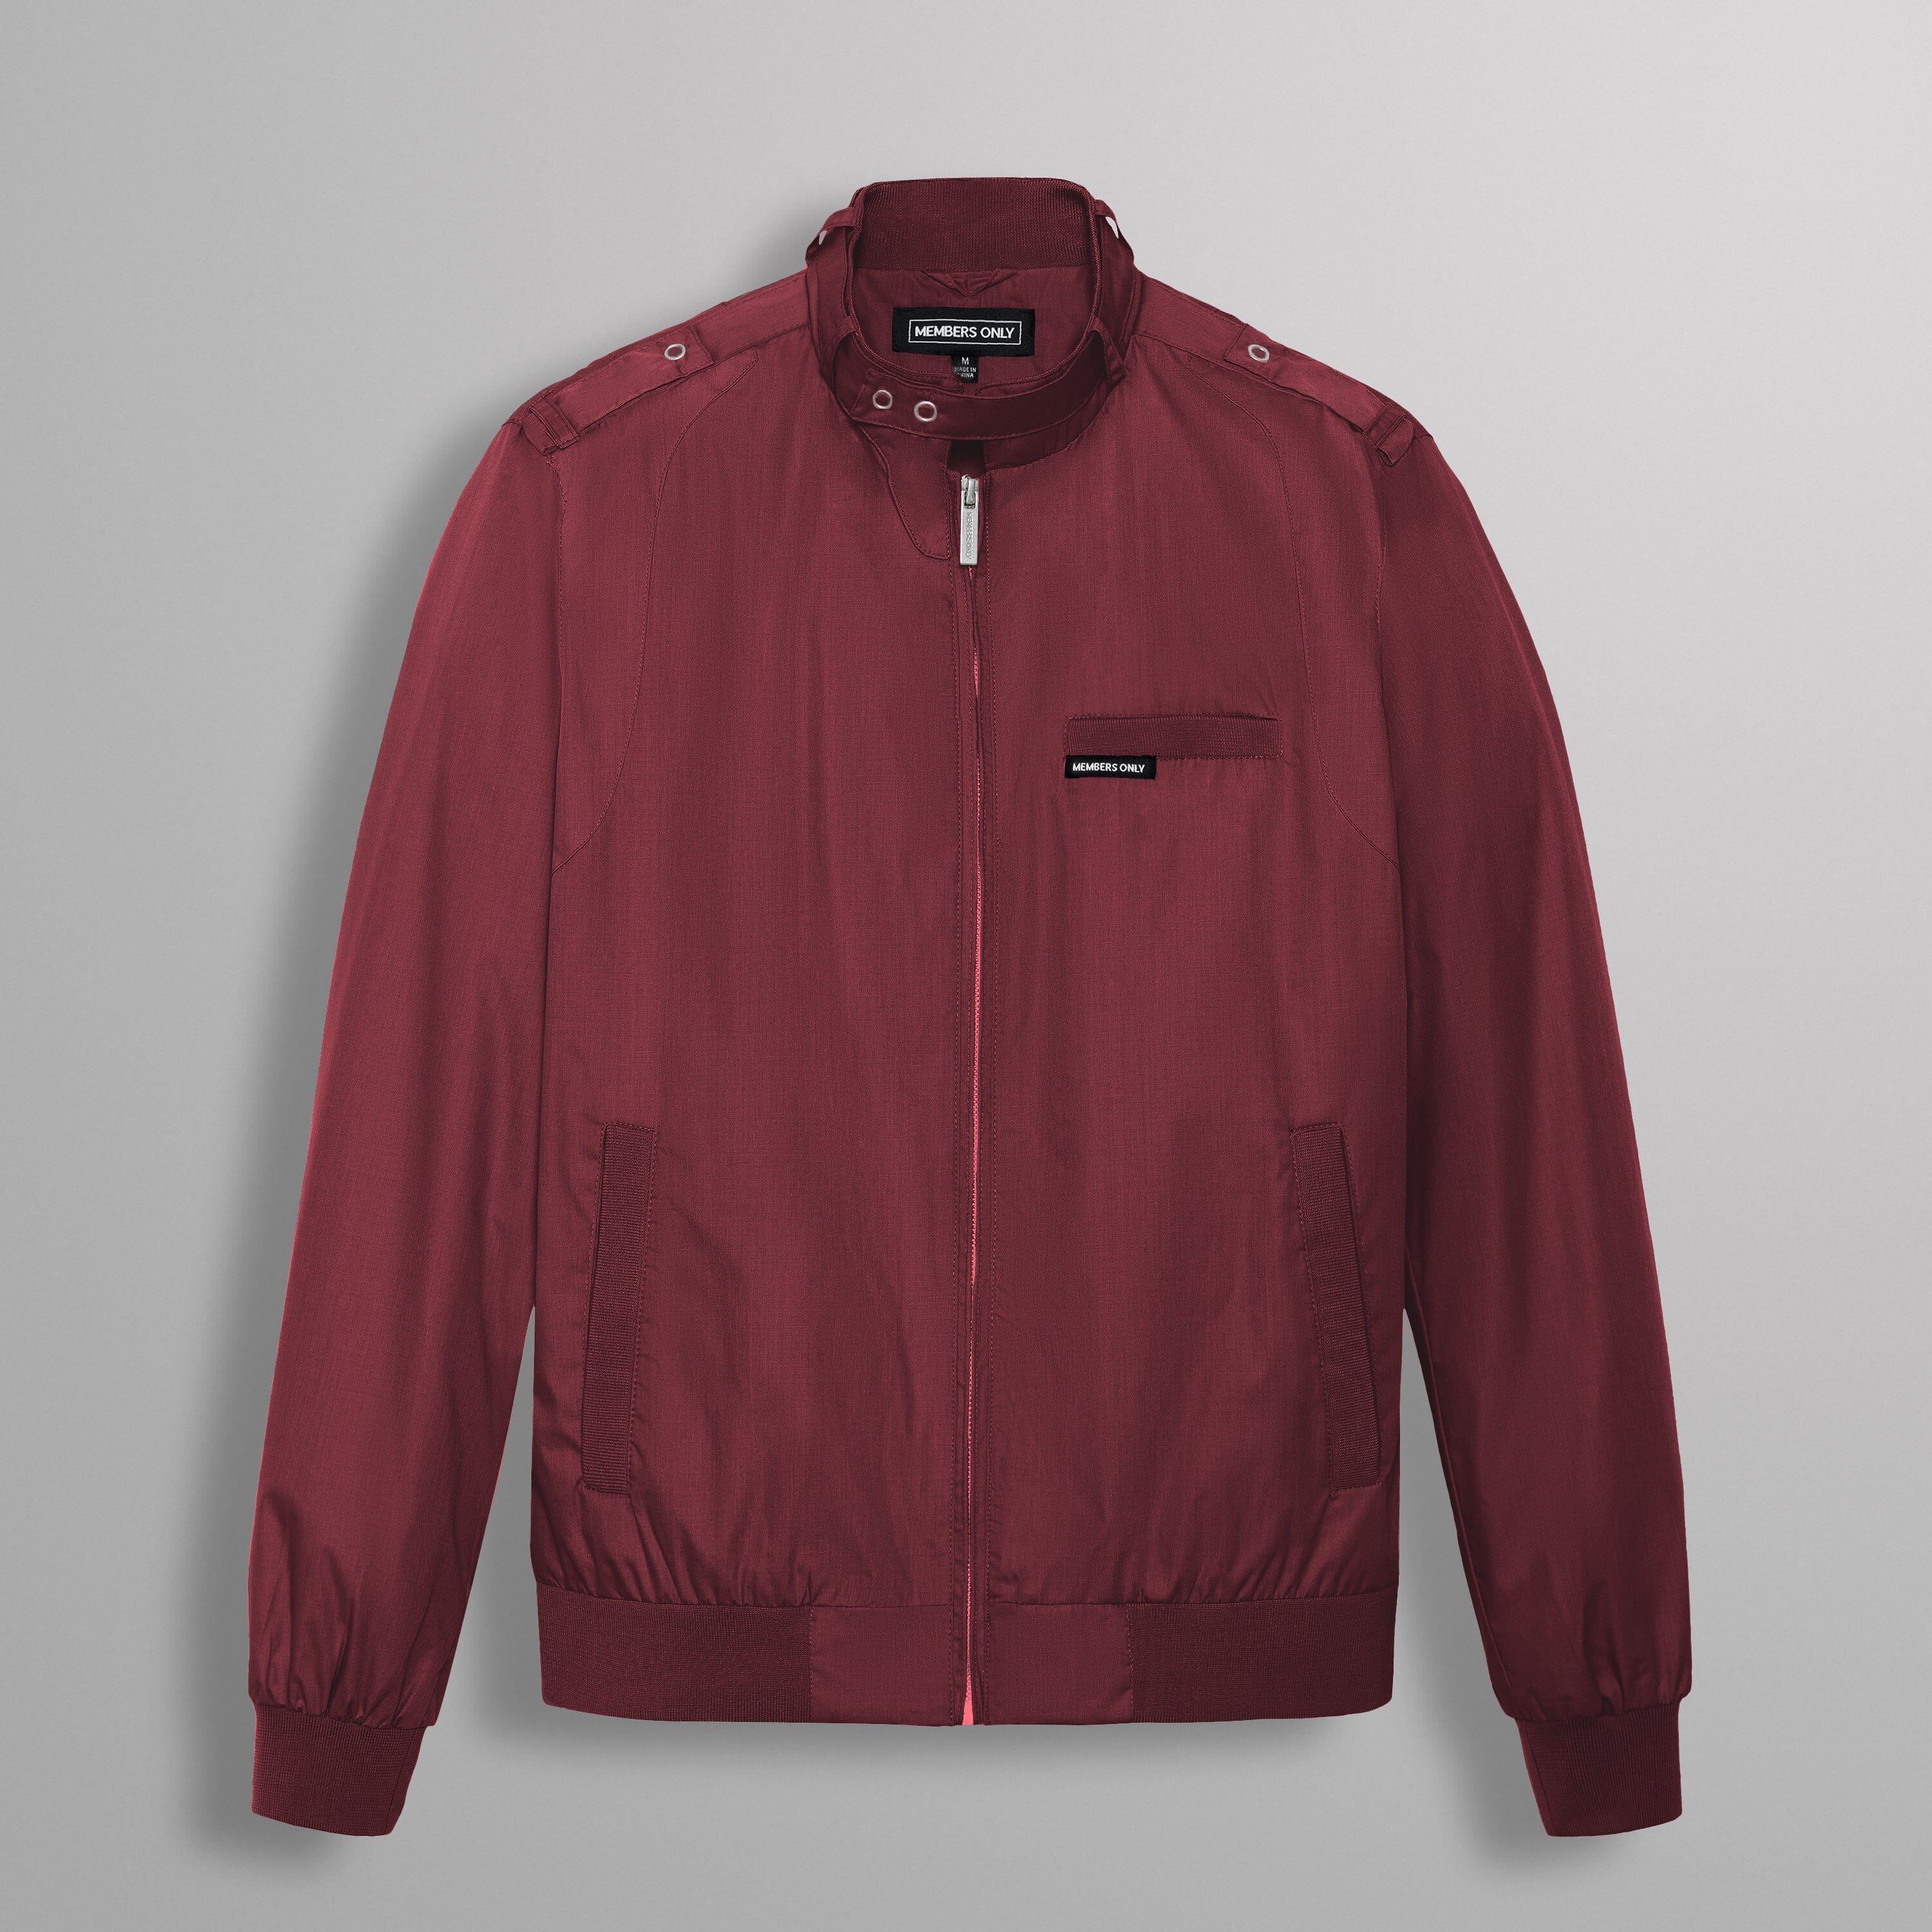 Men's Classic Iconic Racer Jacket Men's Iconic Jacket Members Only 